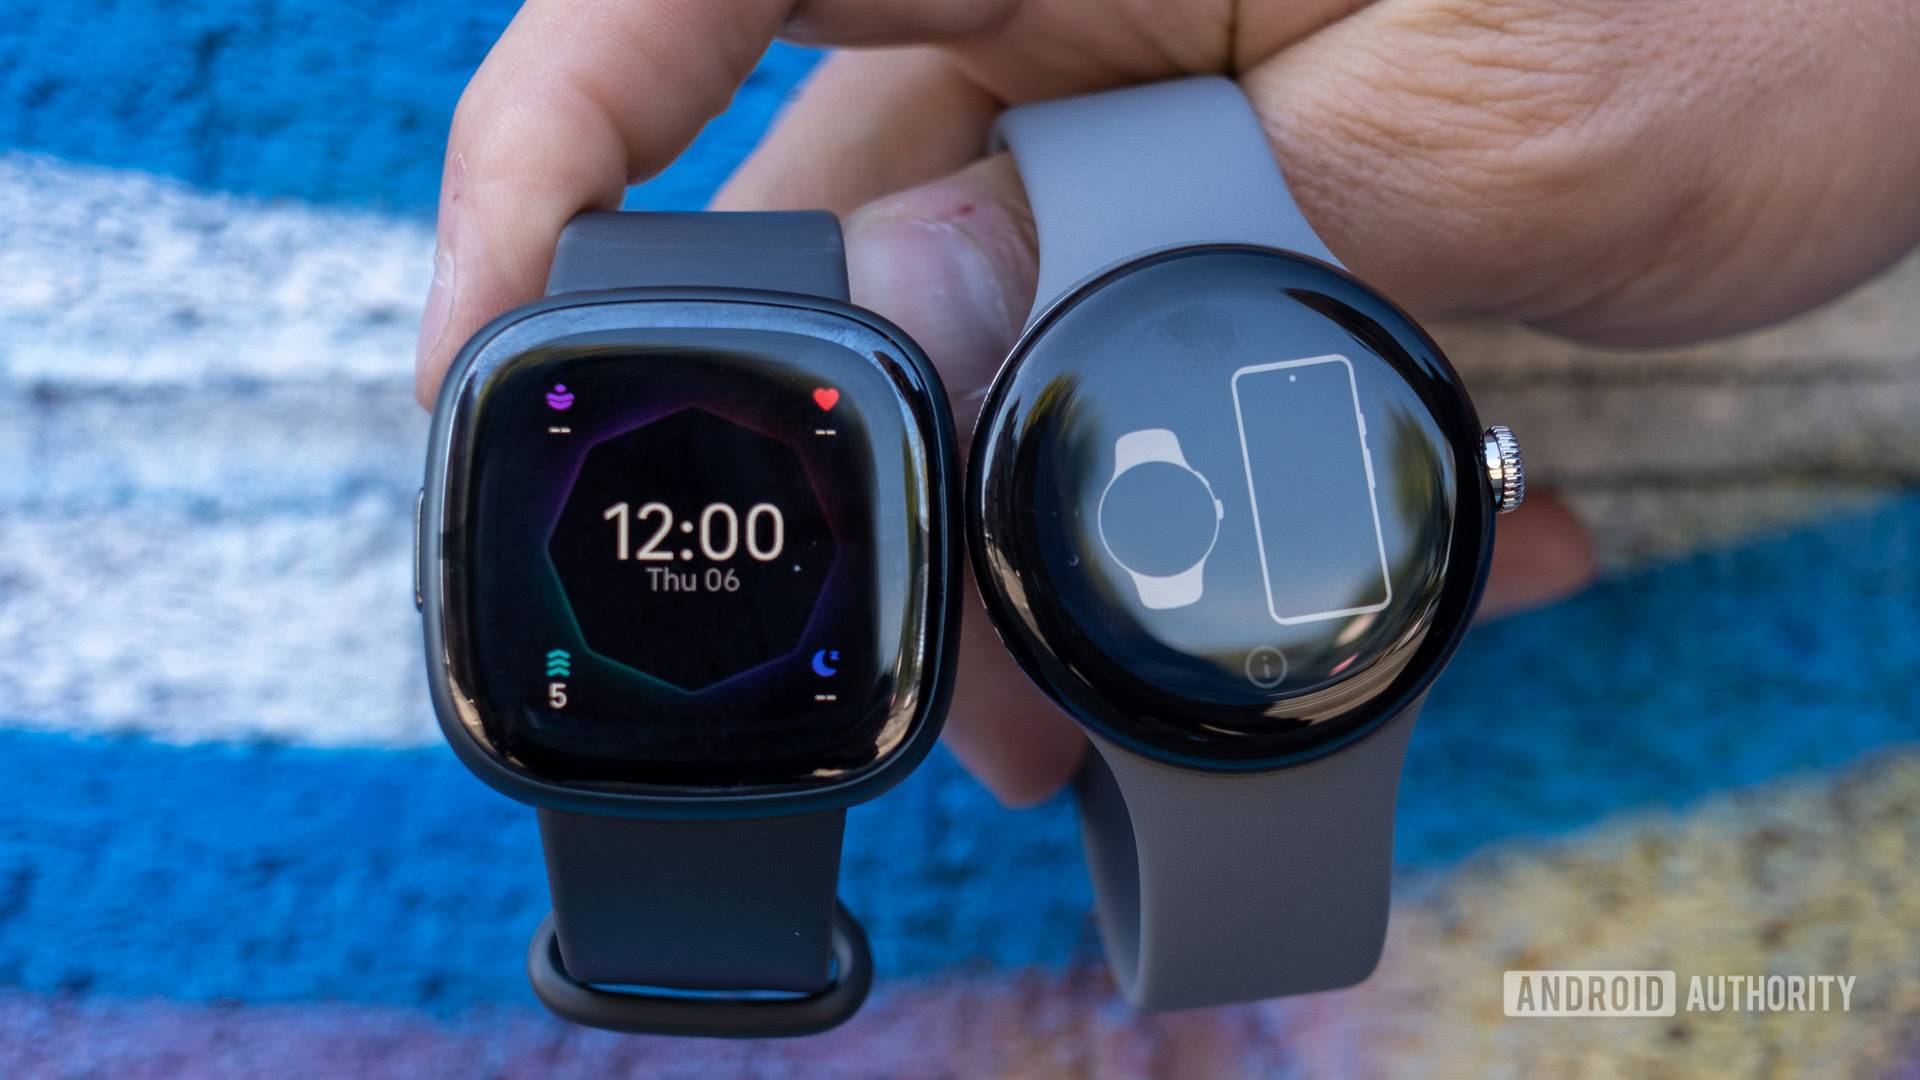 The Google Pixel Watch isn't what it could have been